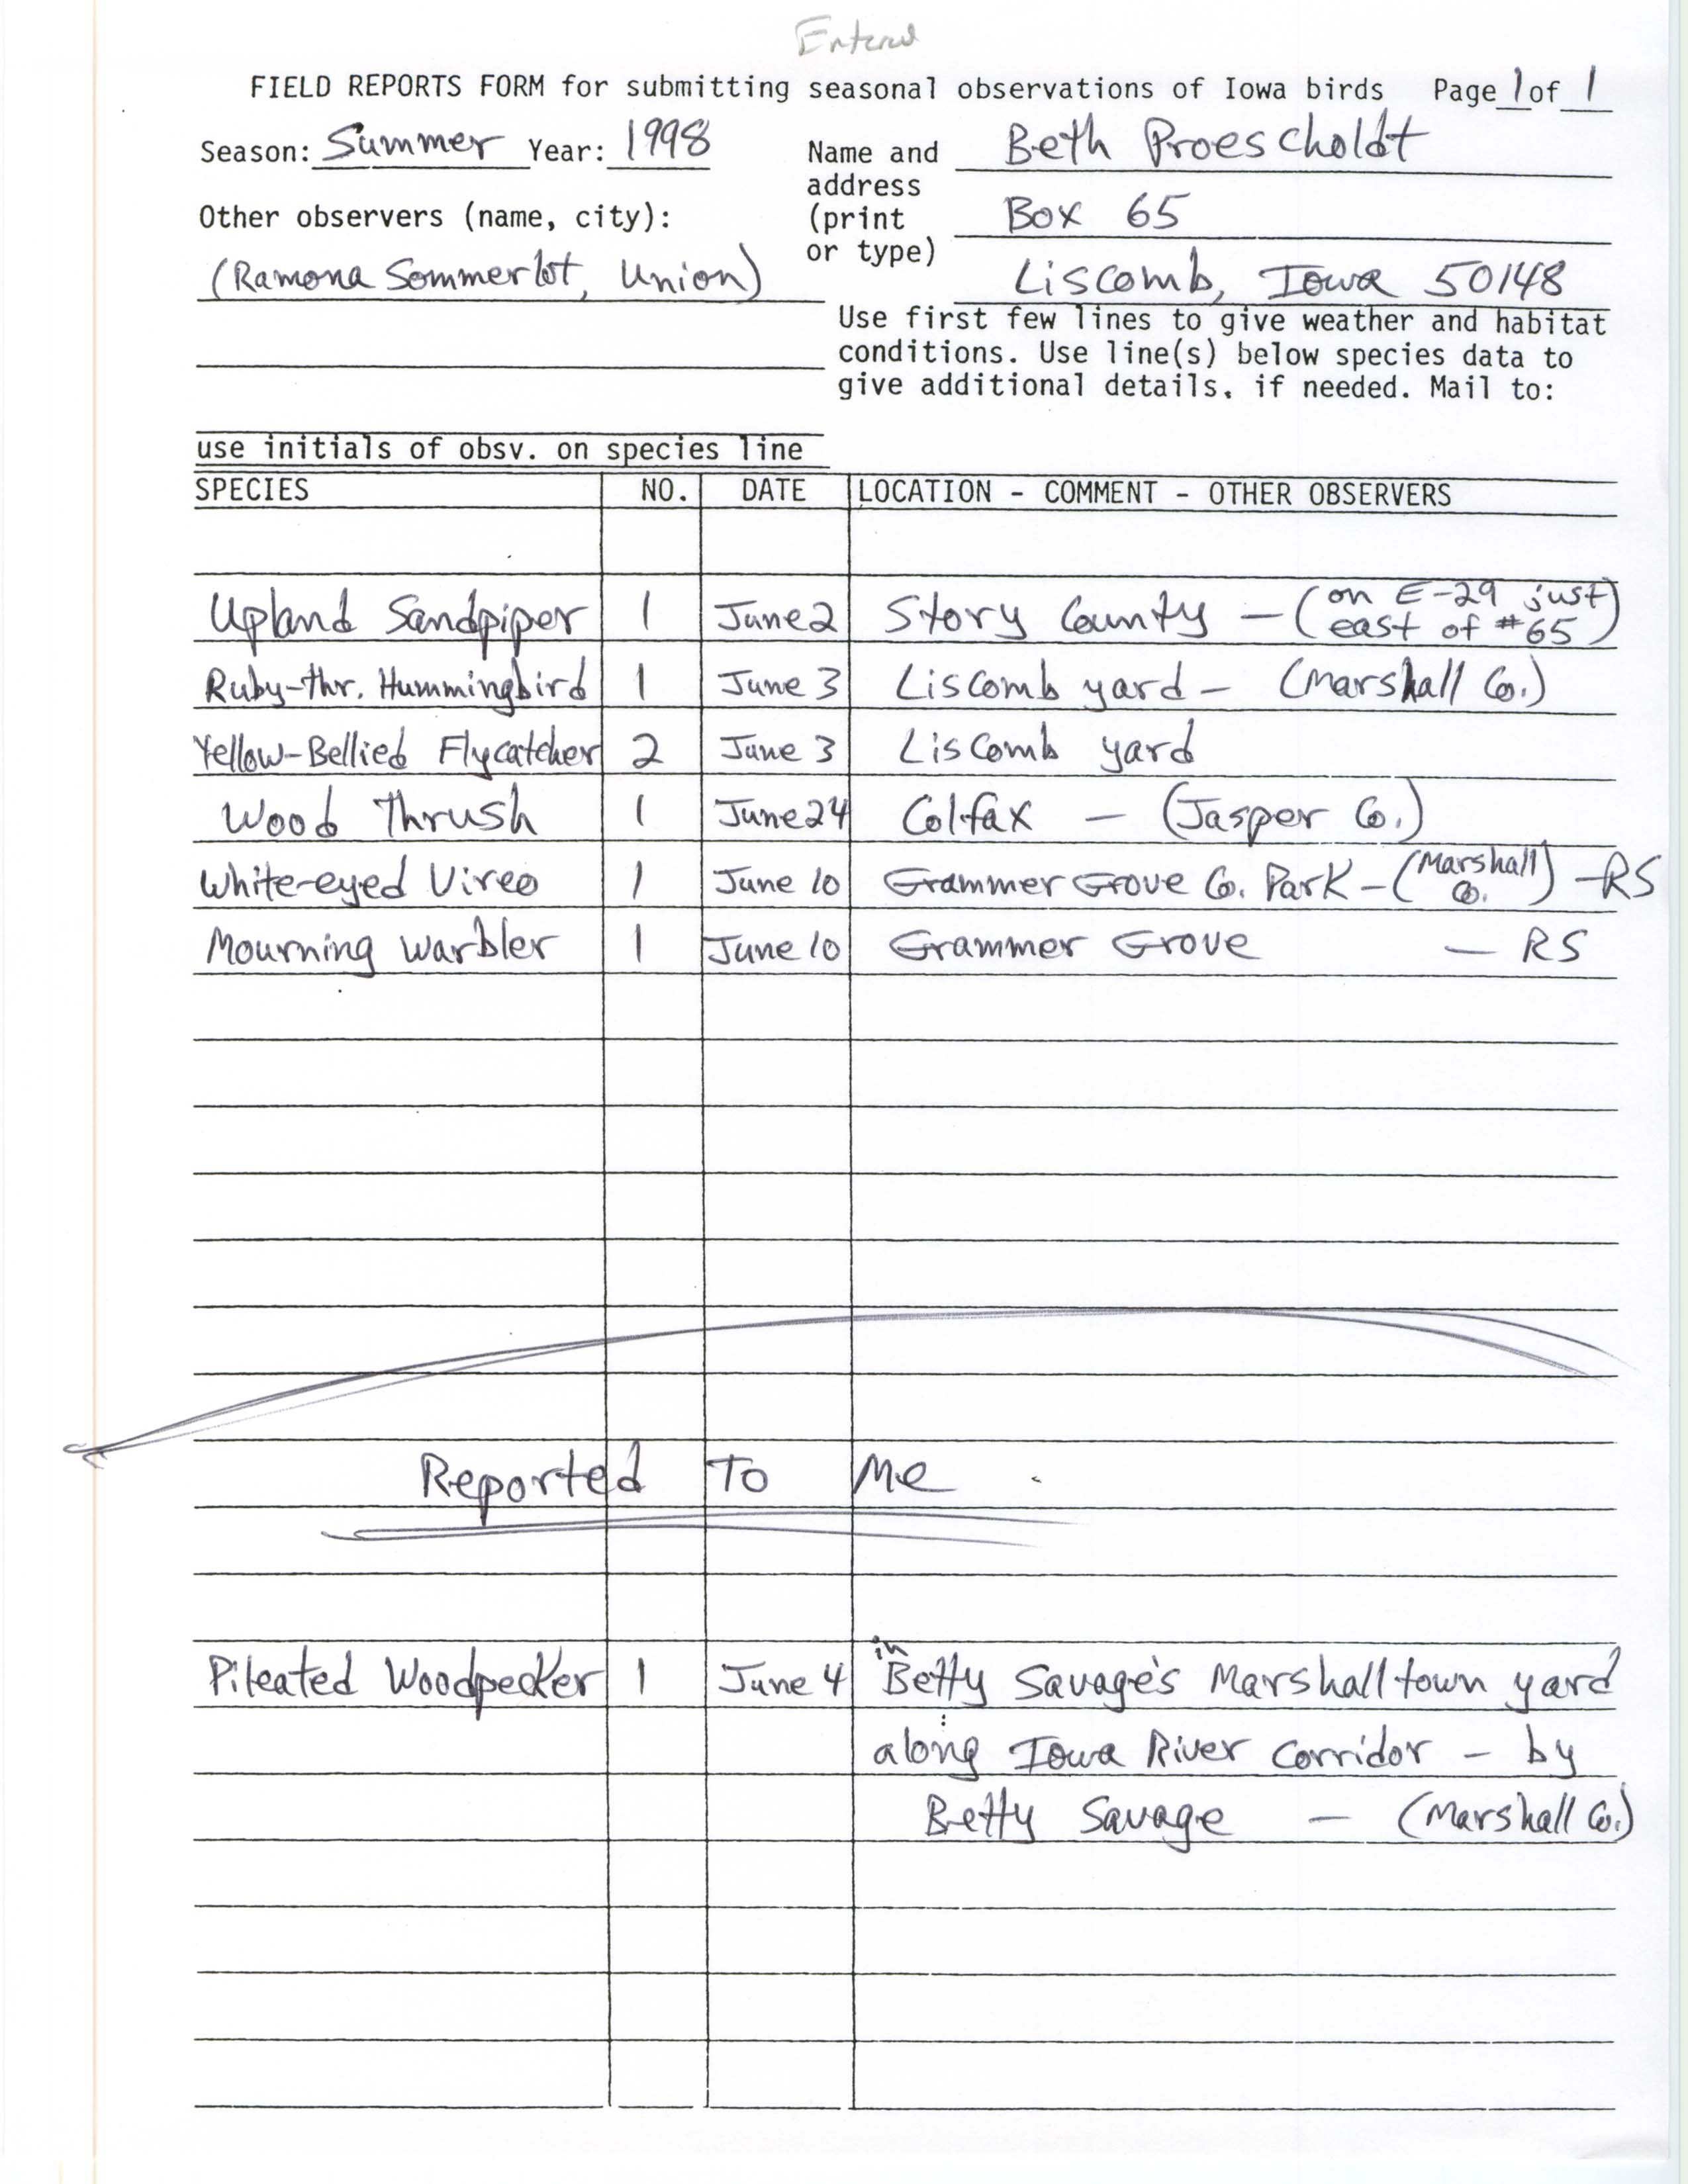 Field reports form for submitting seasonal observations of Iowa birds, Beth Proescholdt, summer 1989